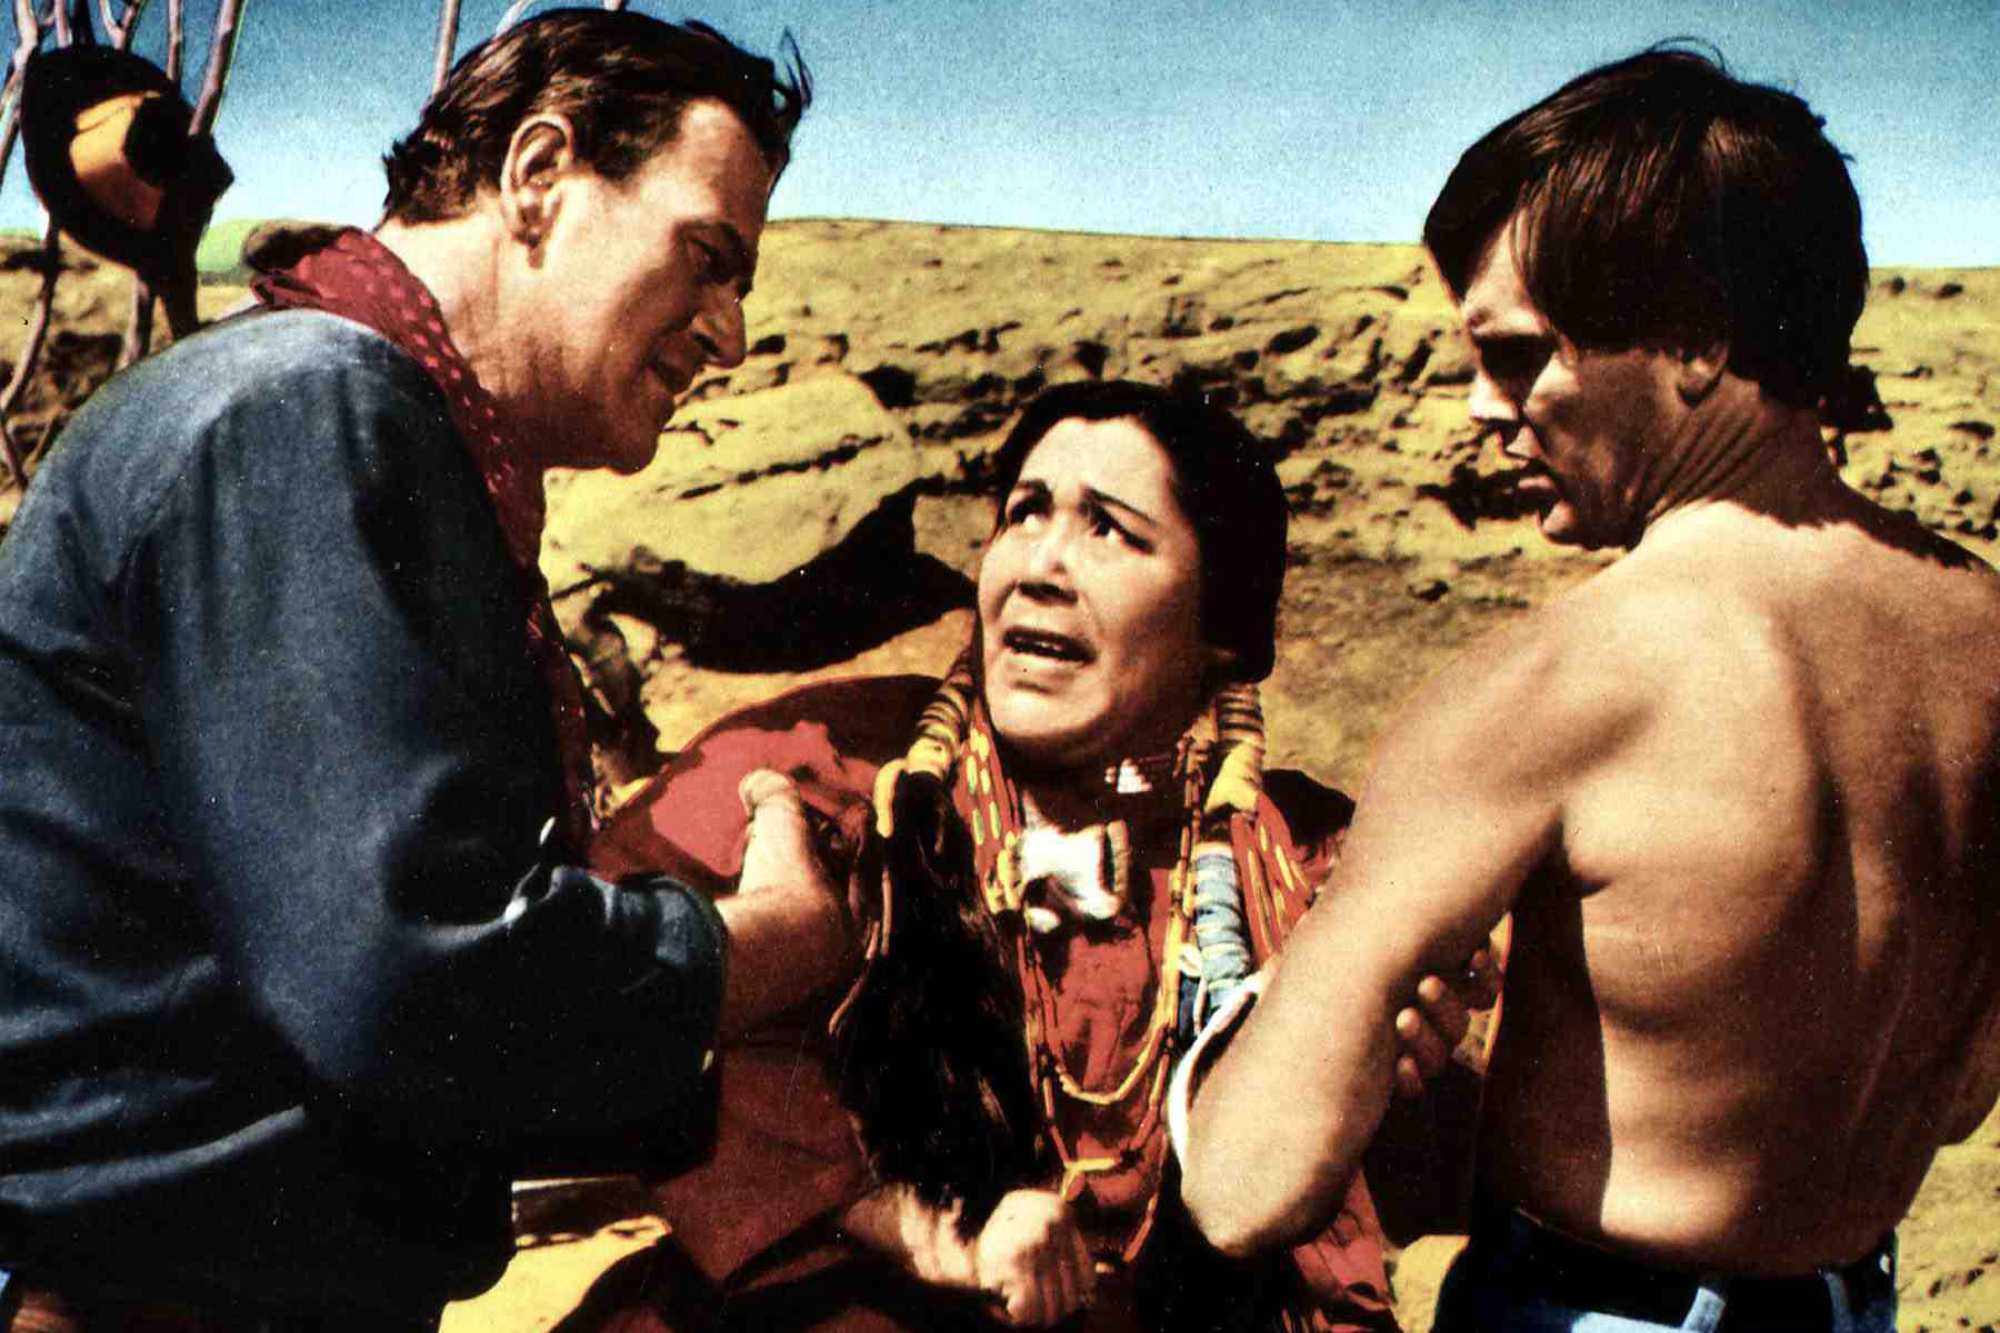 'The Searchers' John Wayne as Ethan Edwards, Beulah Archuletta as Look, and Jeffrey Hunter as Martin Pawley. Wayne is gripping ARchuletta's arm, while she holds onto Pawley's arm.